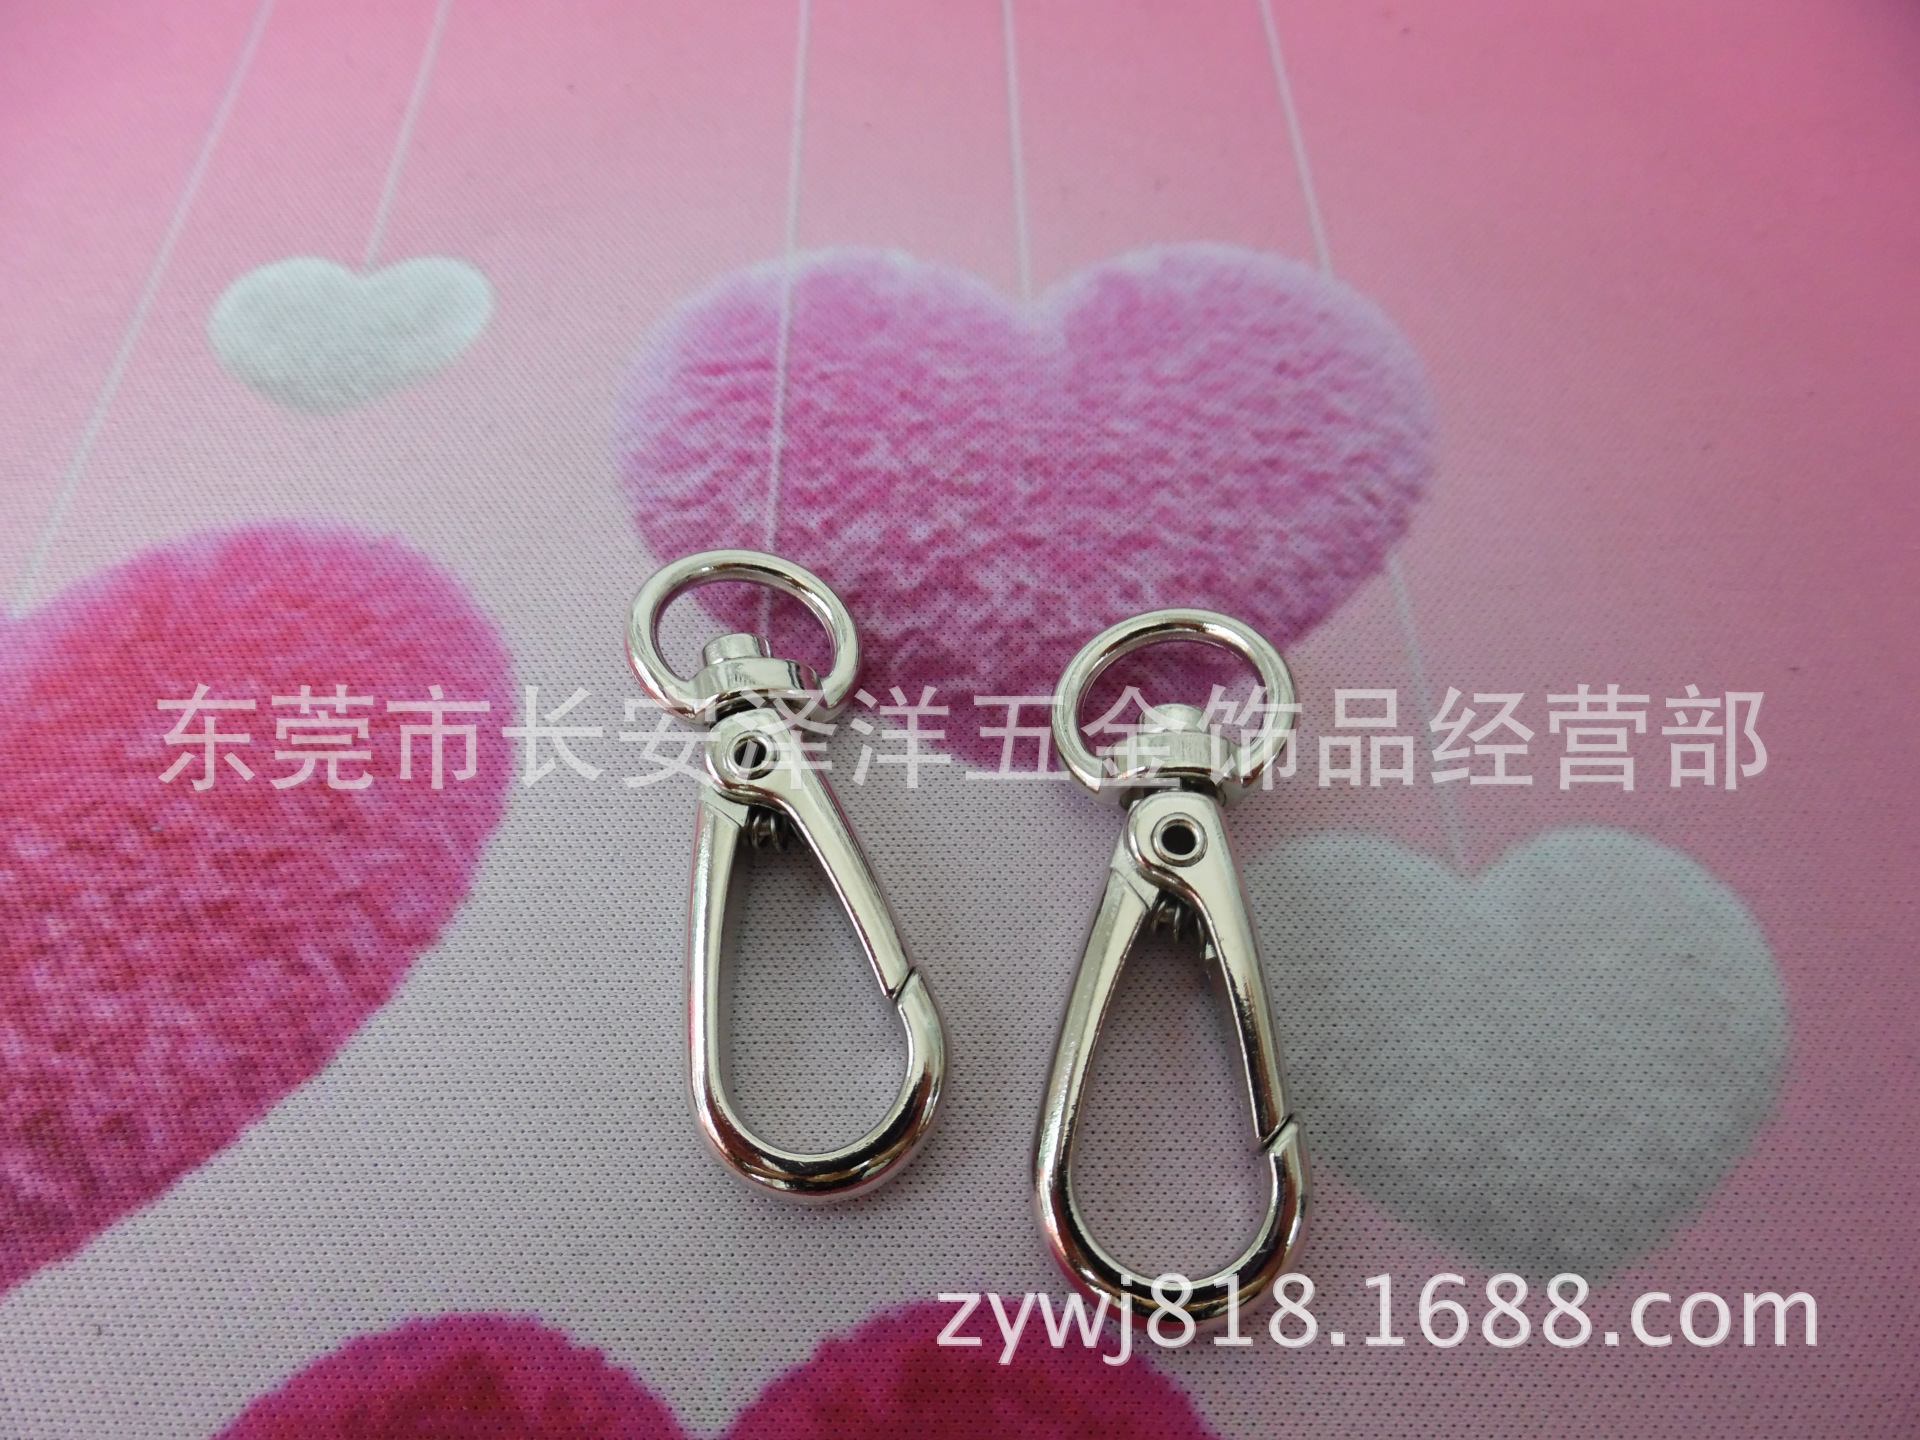 Manufacturers Wholesale a Large Number of Snap Hook Luggage Buckle Key Chains with Reliable Quality and Fast Shipment